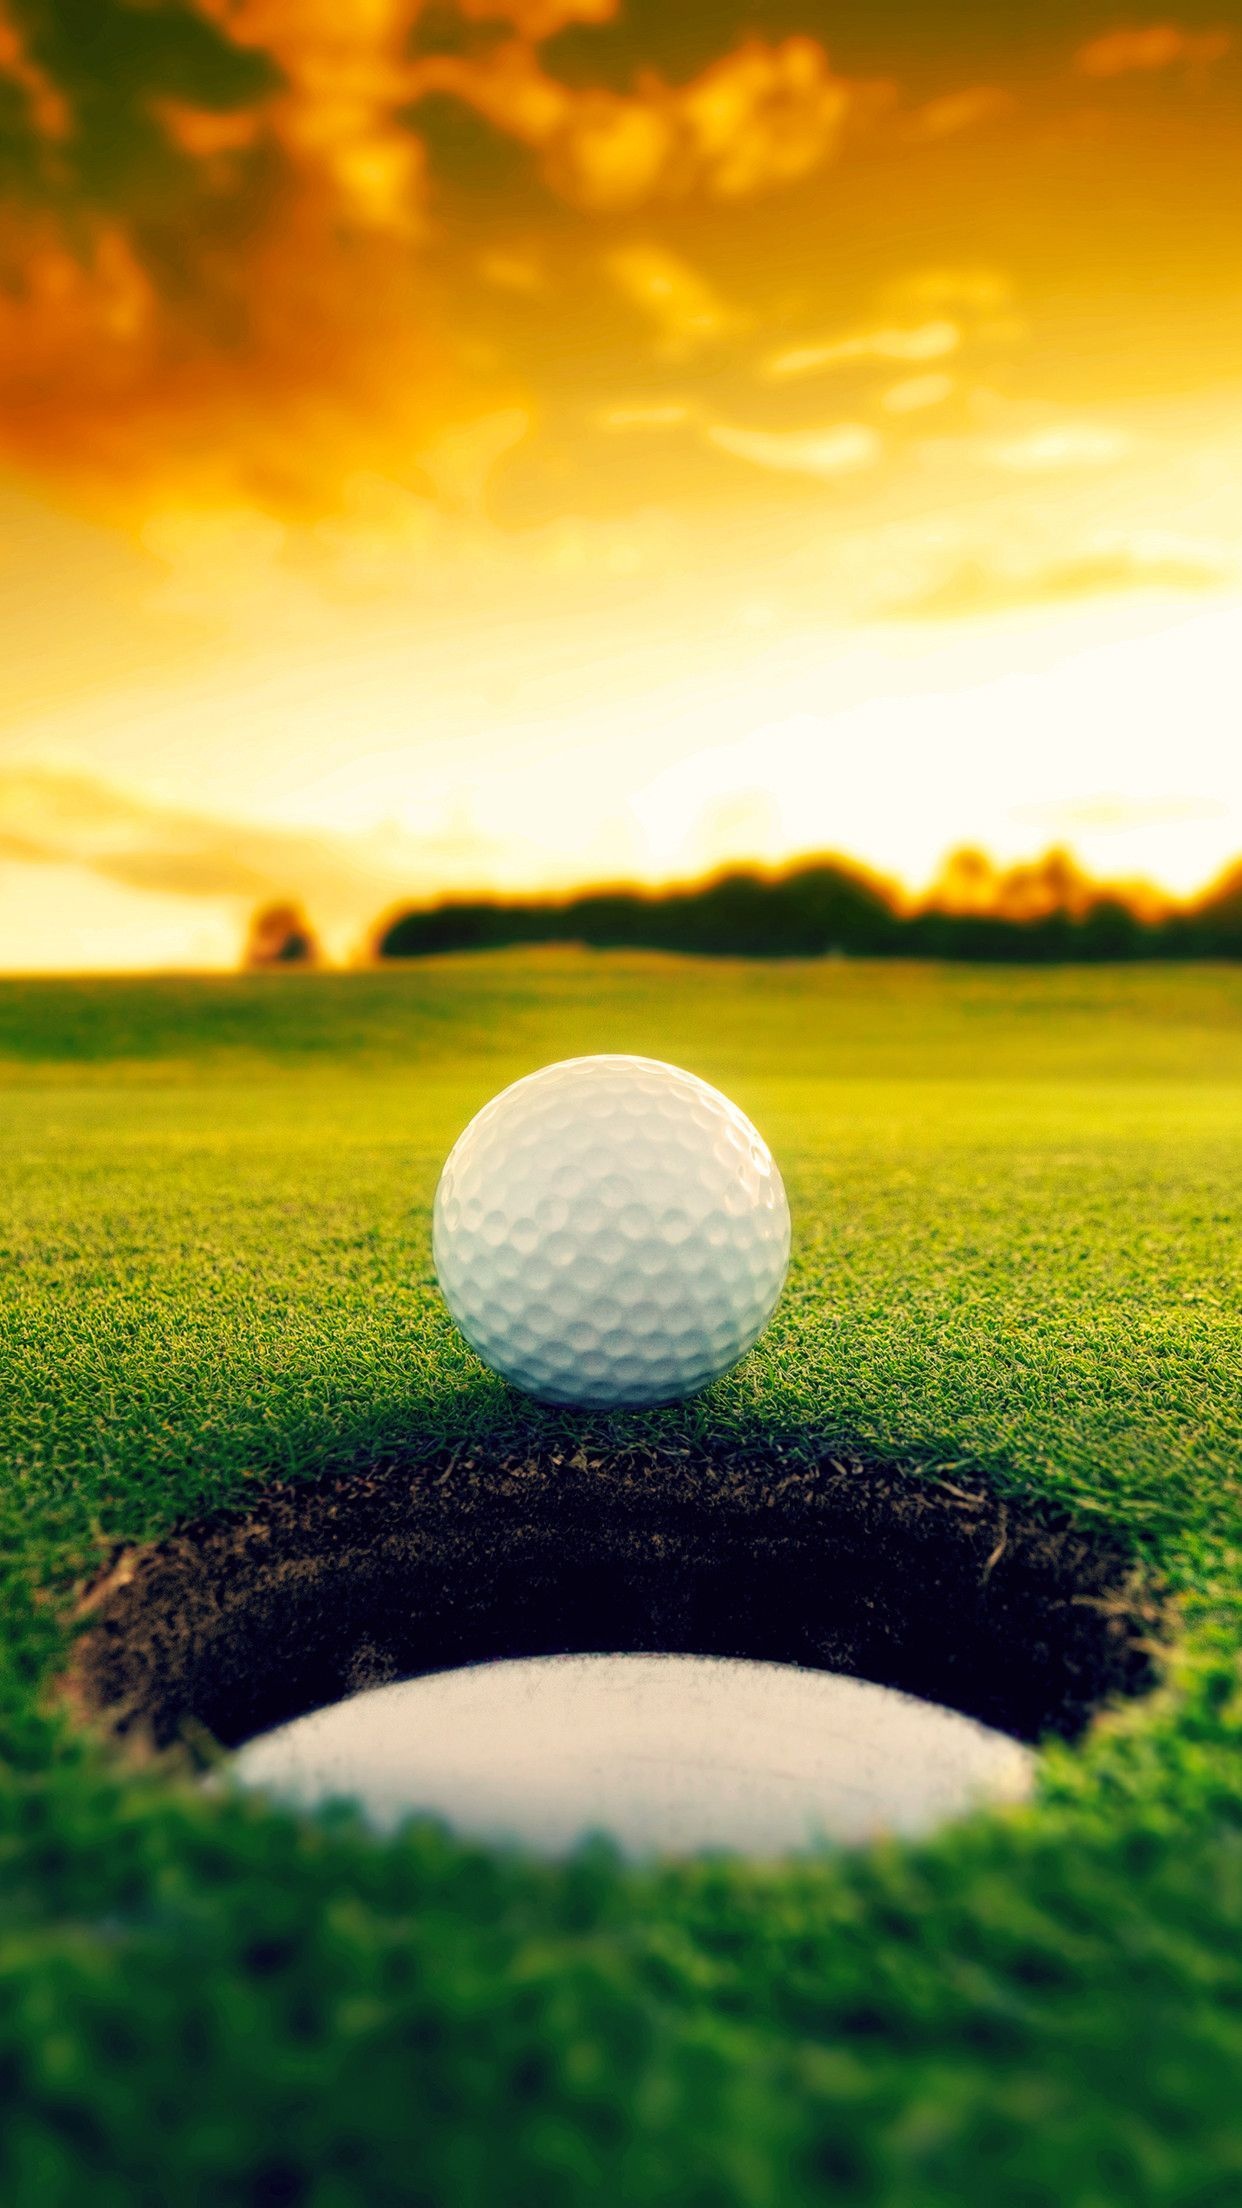 Golf Course: A game in which a small white ball is hit across open ground and into small holes by means of clubs. 1250x2210 HD Wallpaper.